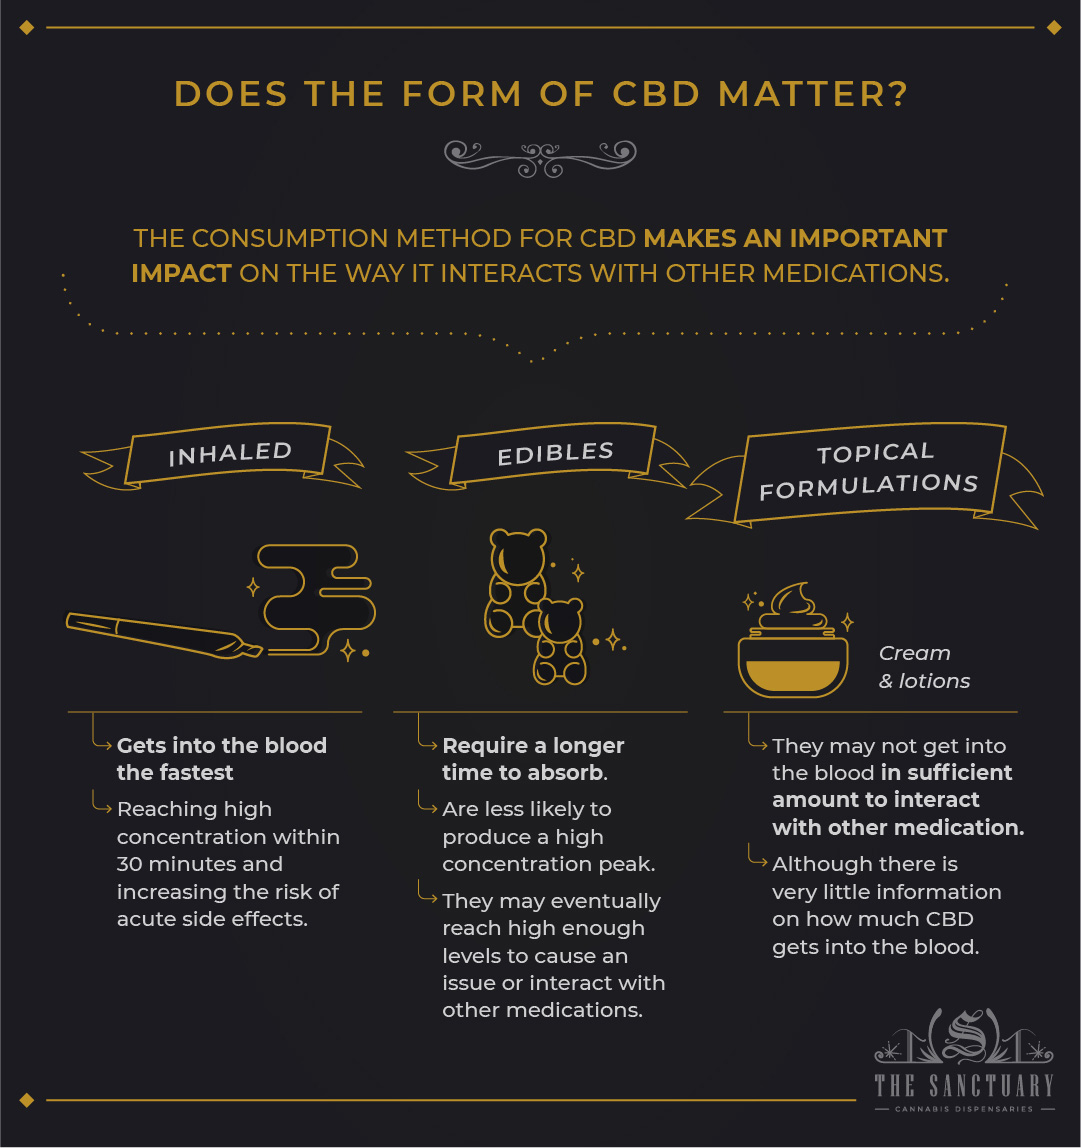 What Drugs Should Not Be Taken With CBD